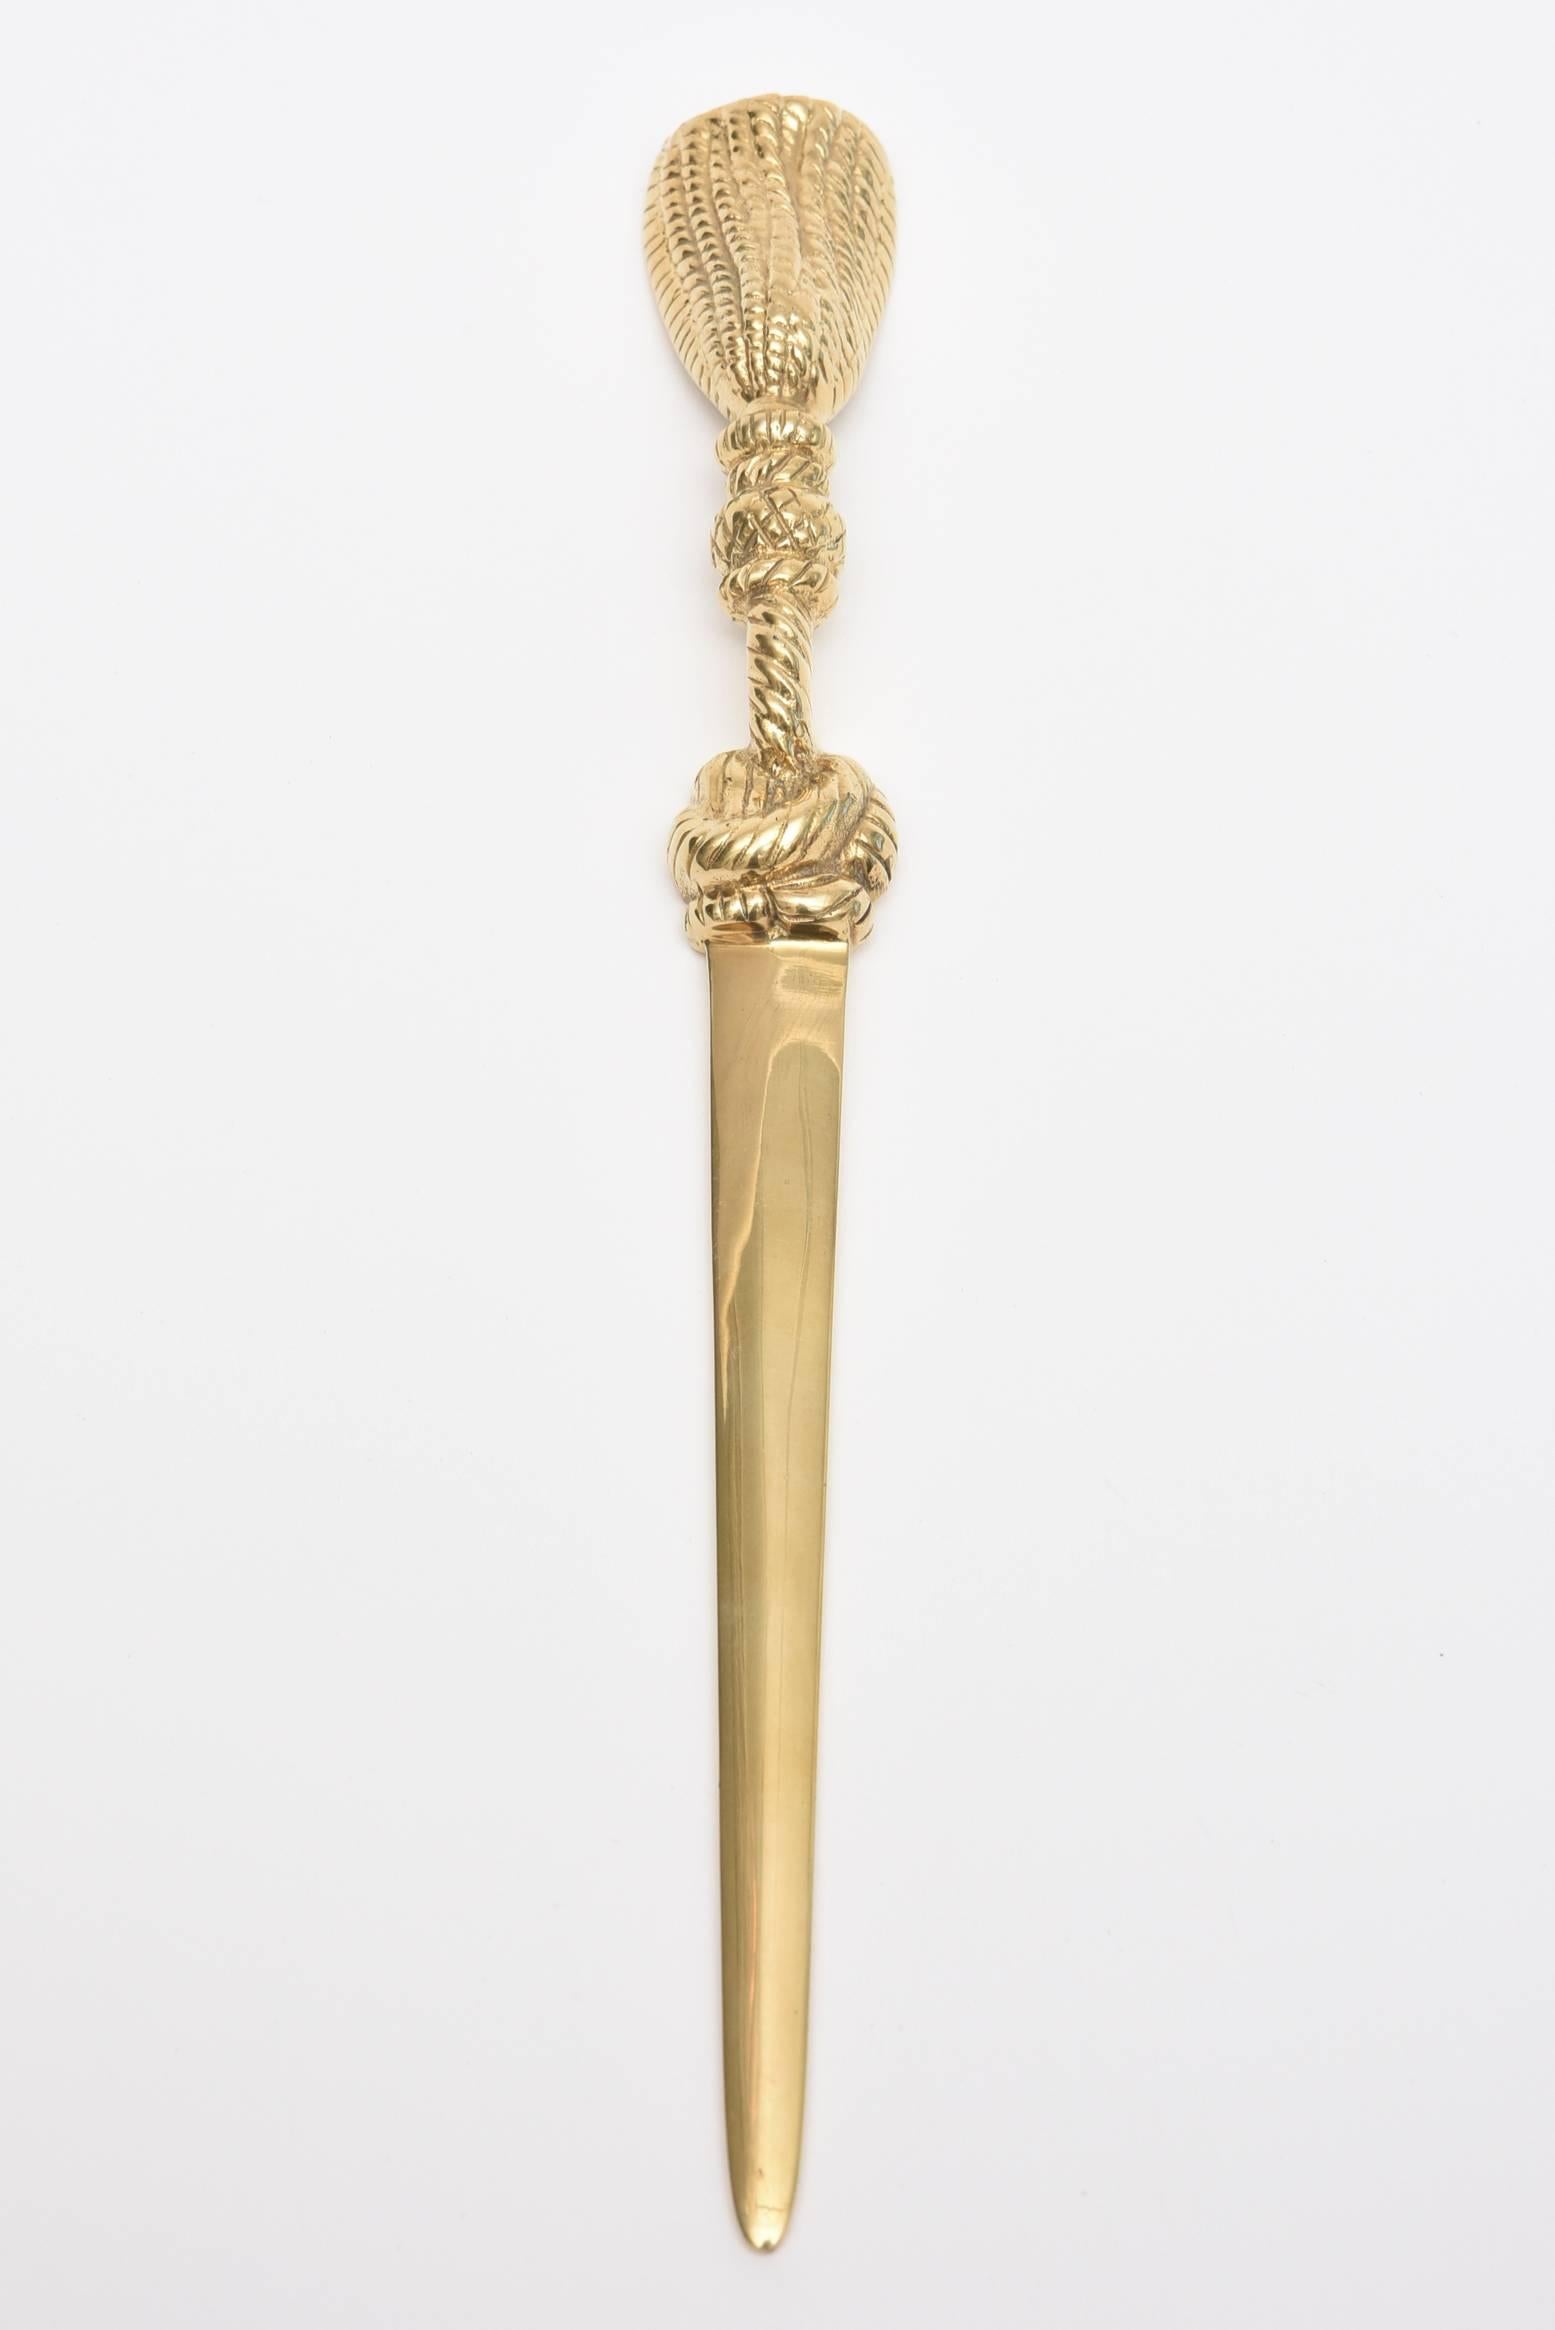 This lovely desk accessory in the way of a solid brass braided and tasseled letter opener is a divine way to open up mail and accept checks. It is from the period of Mid-Century Modern and has good weight to it. This makes a great gift! It is